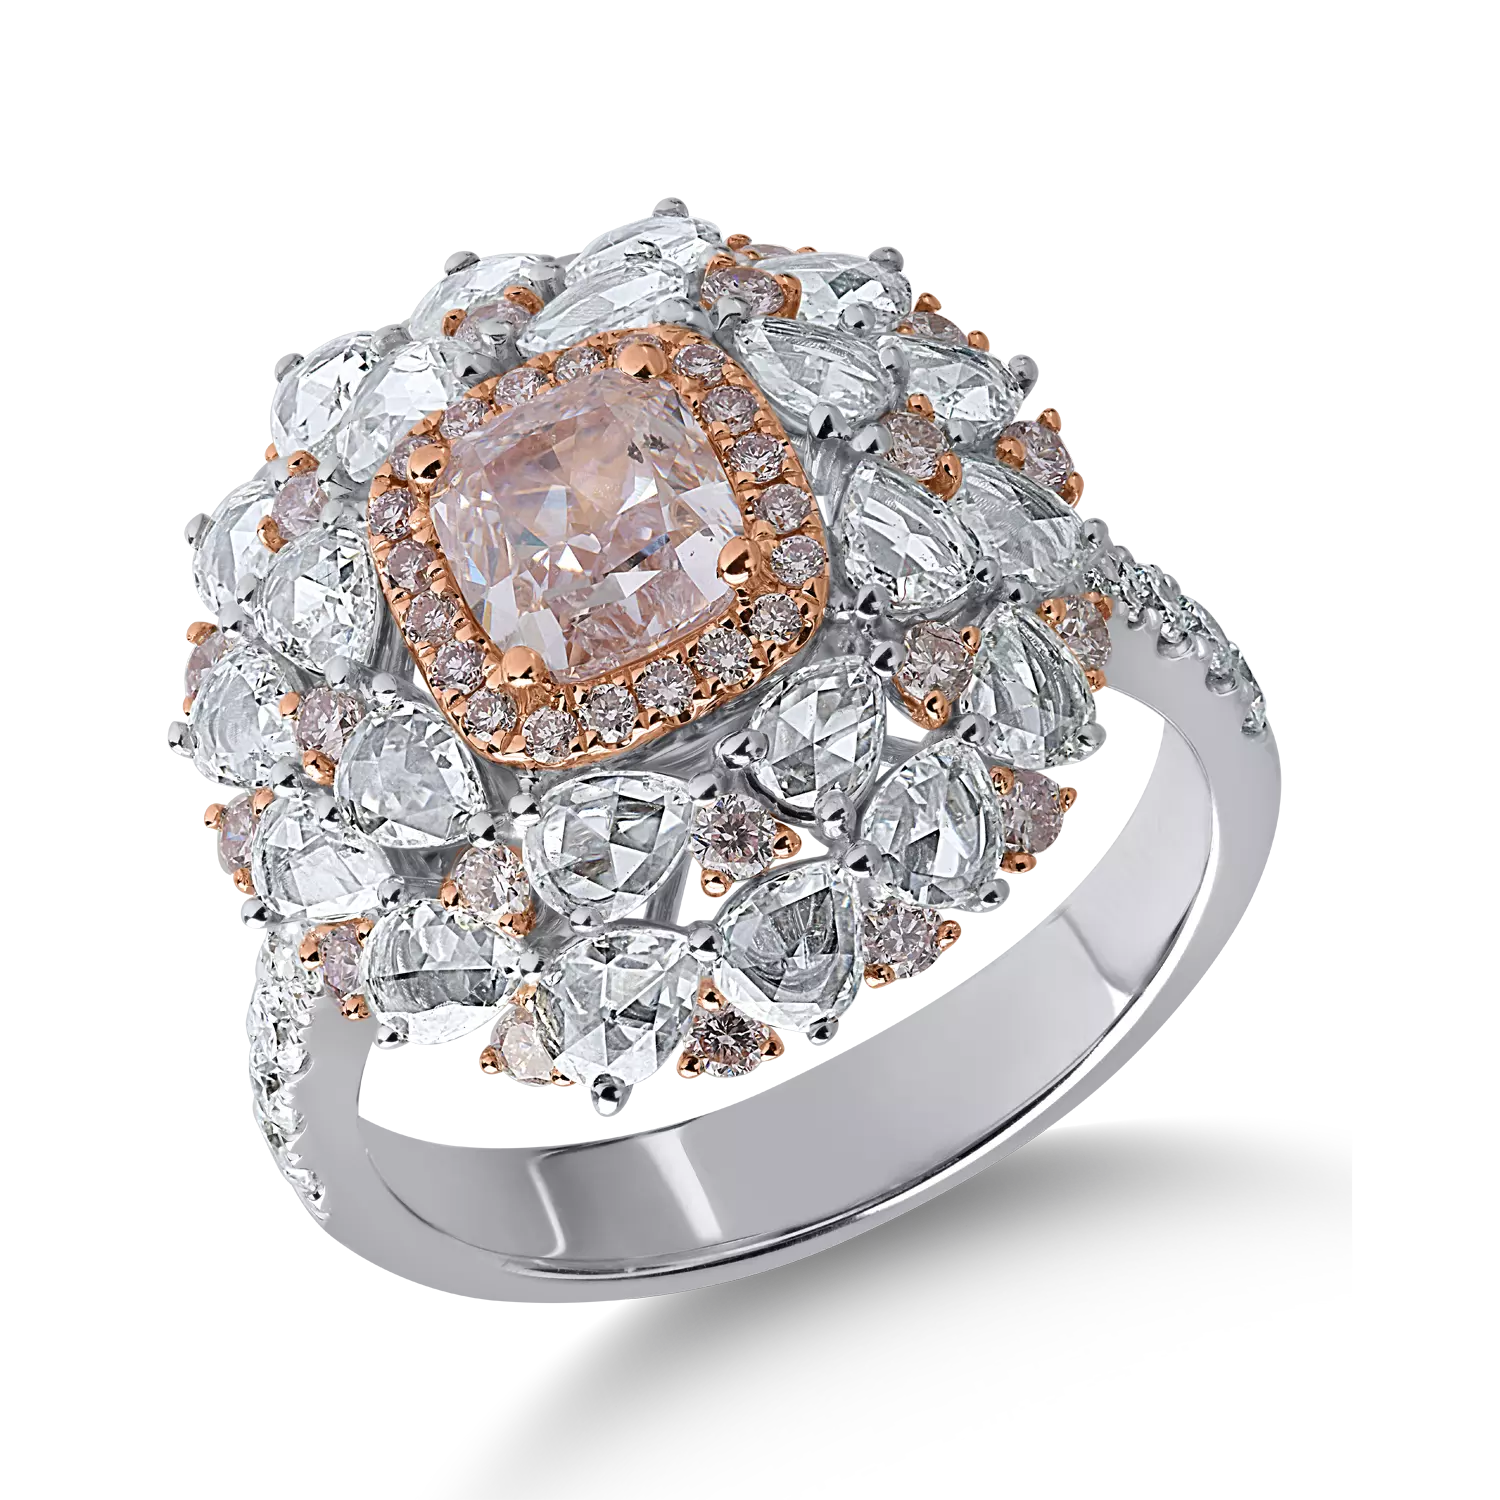 White-rose gold ring with 2.85ct diamonds